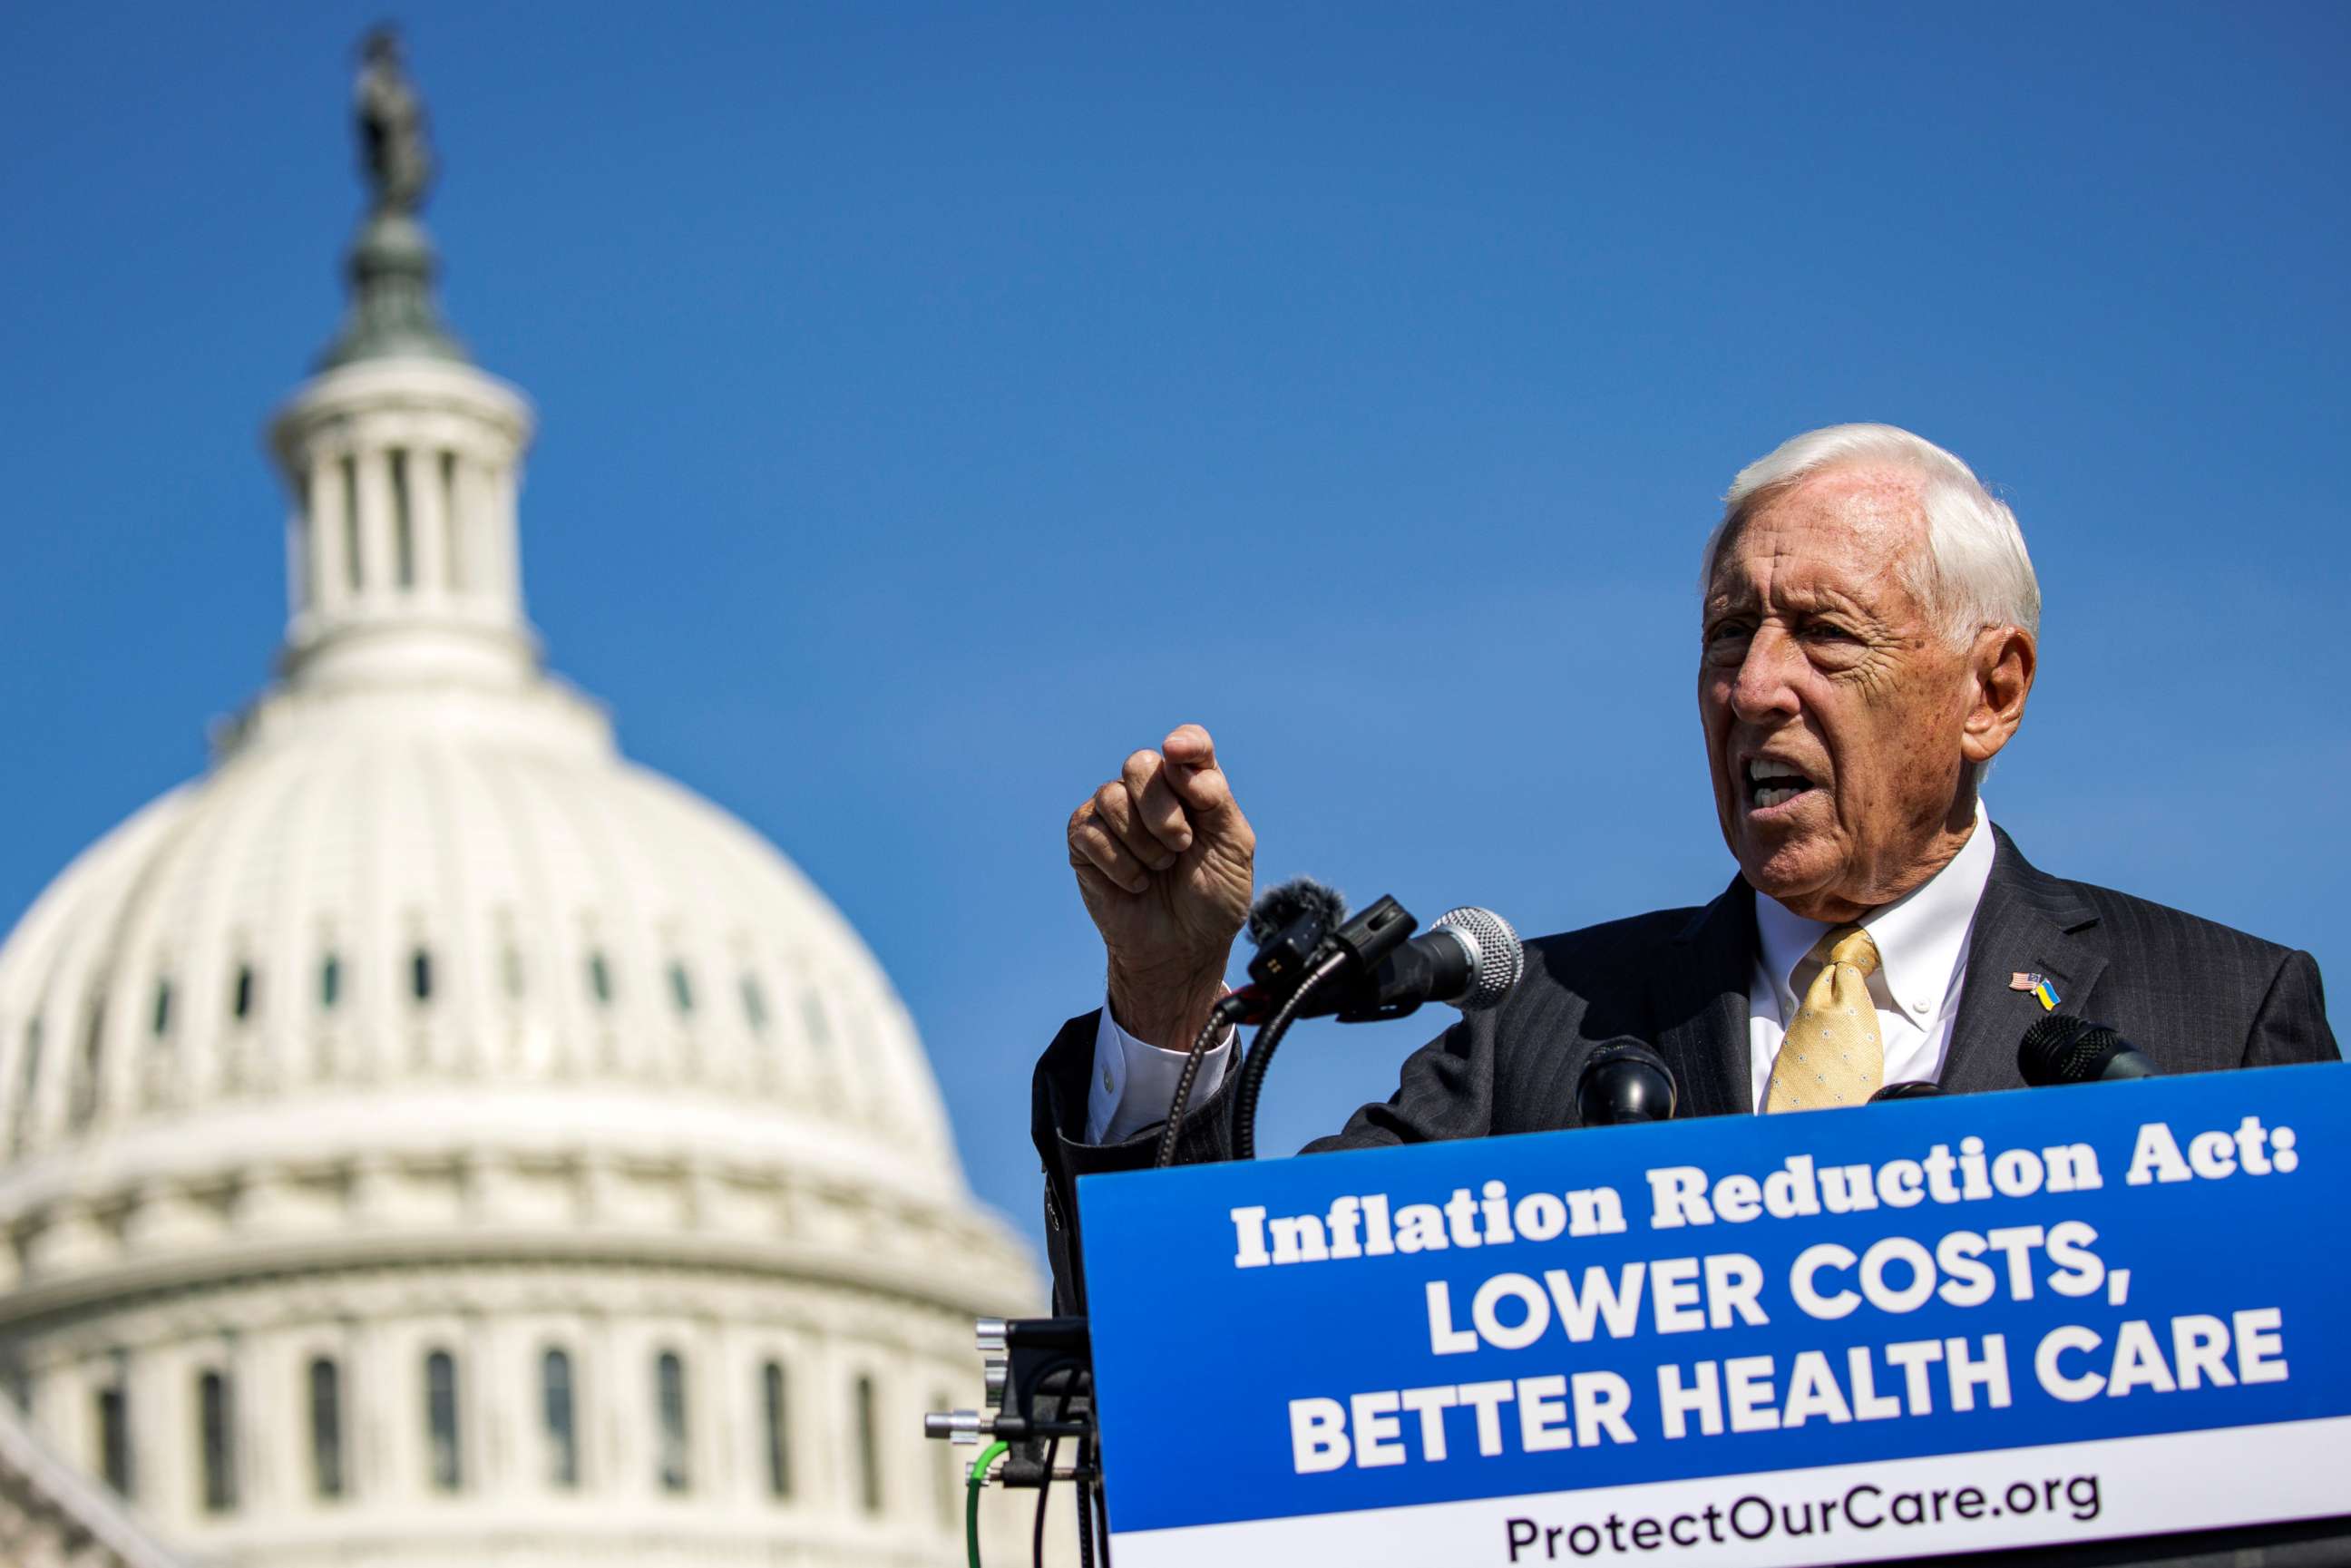 PHOTO: House Majority Leader Steny Hoyer speaks during a press conference on September 21, 2022 in Washington, DC.